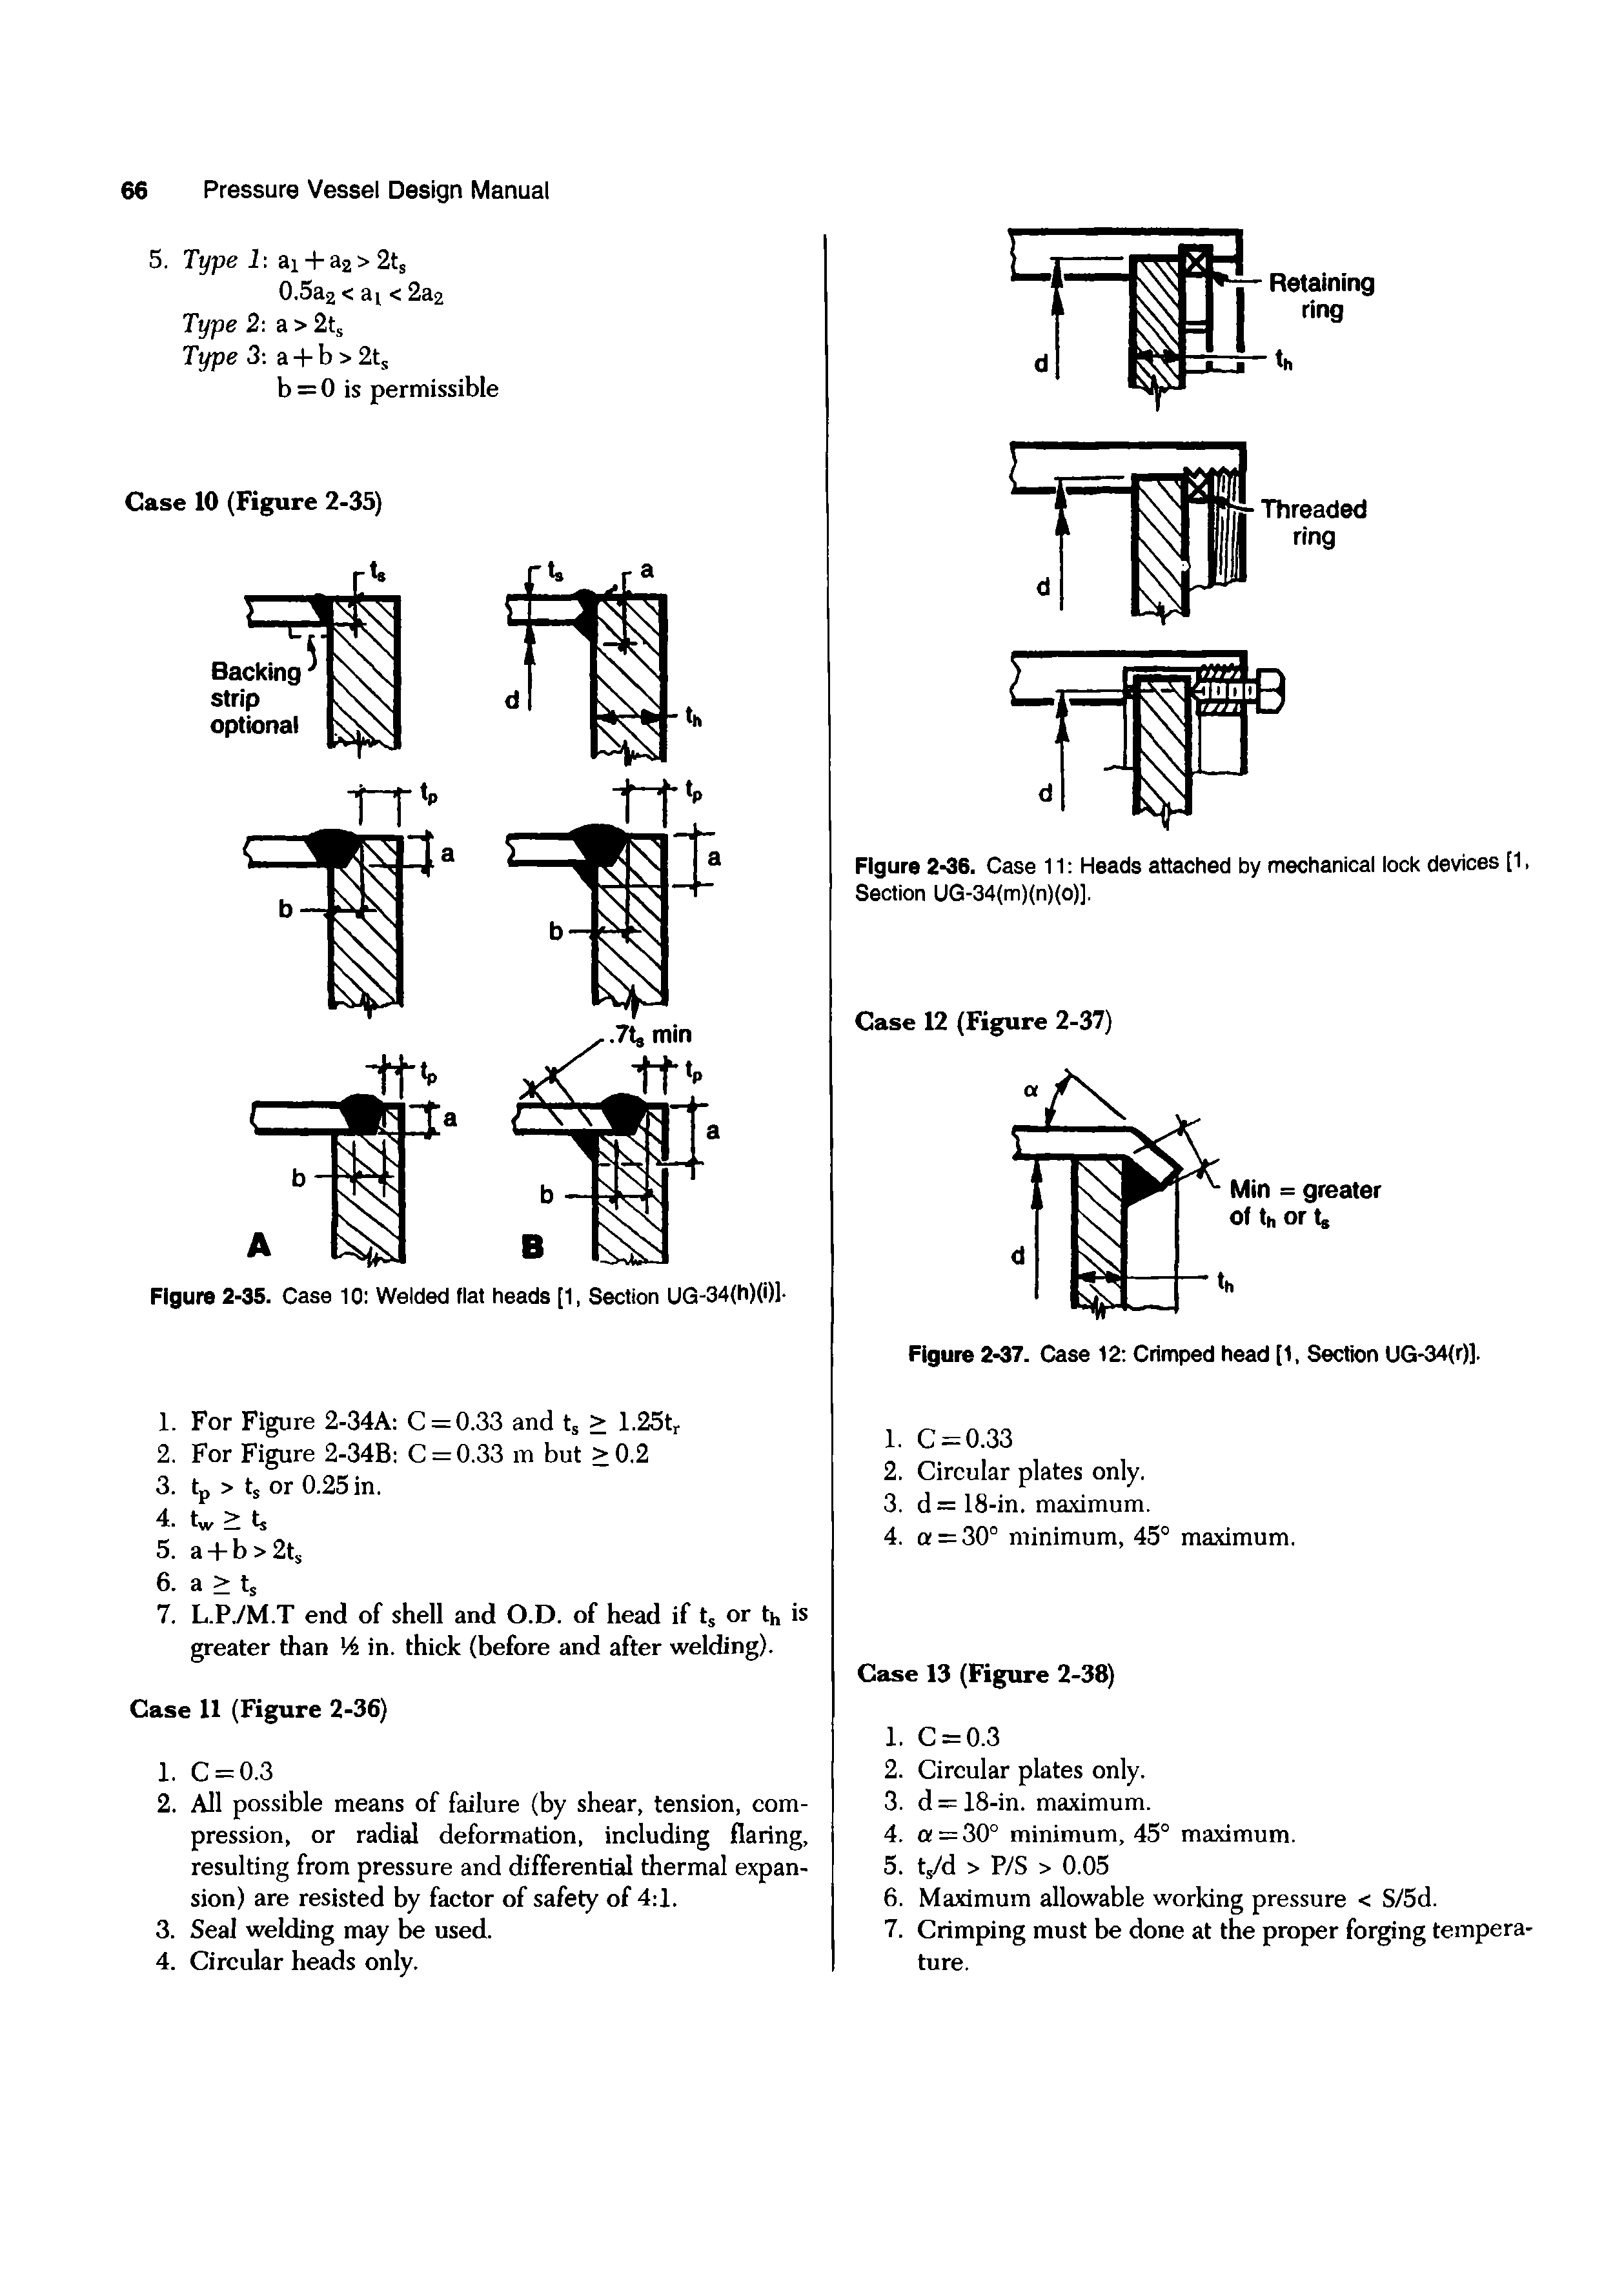 Figure 2-36. Case 11 Heads attached by mechanical lock devices [1, Section UG-34(m)(n)(o)].